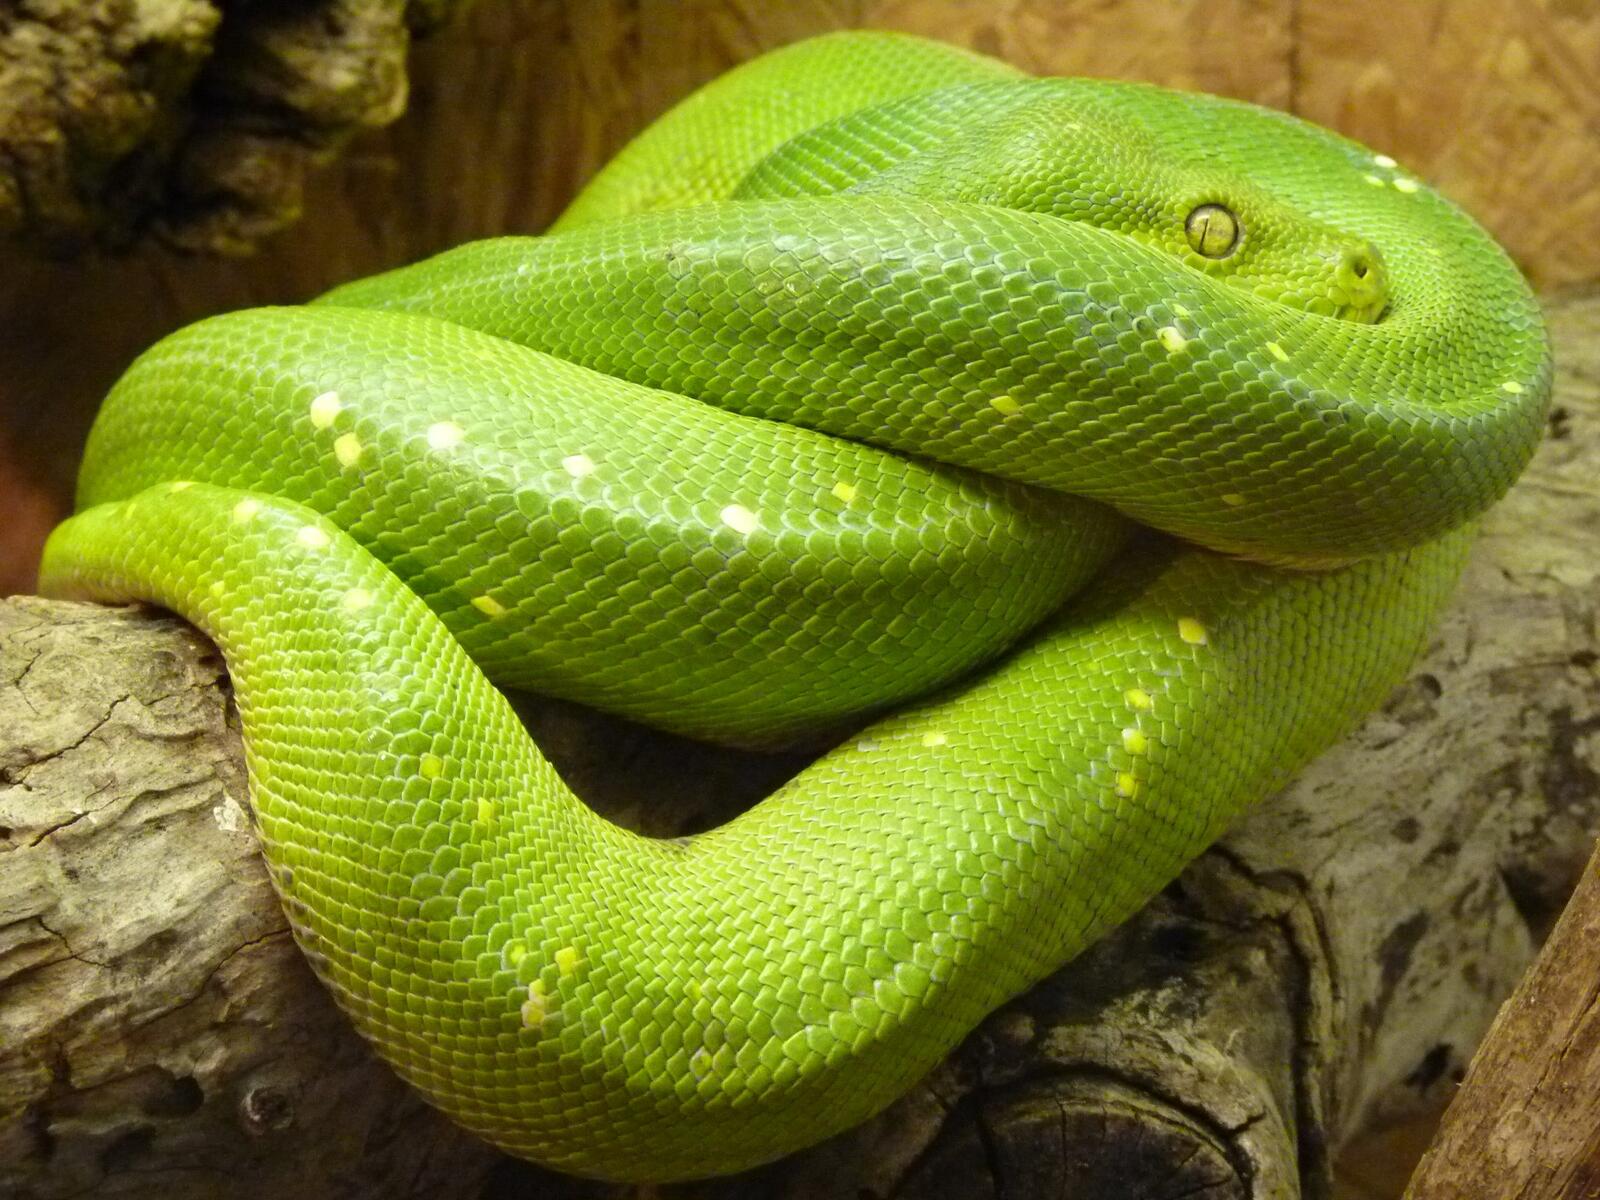 Wallpapers animal green reptile on the desktop